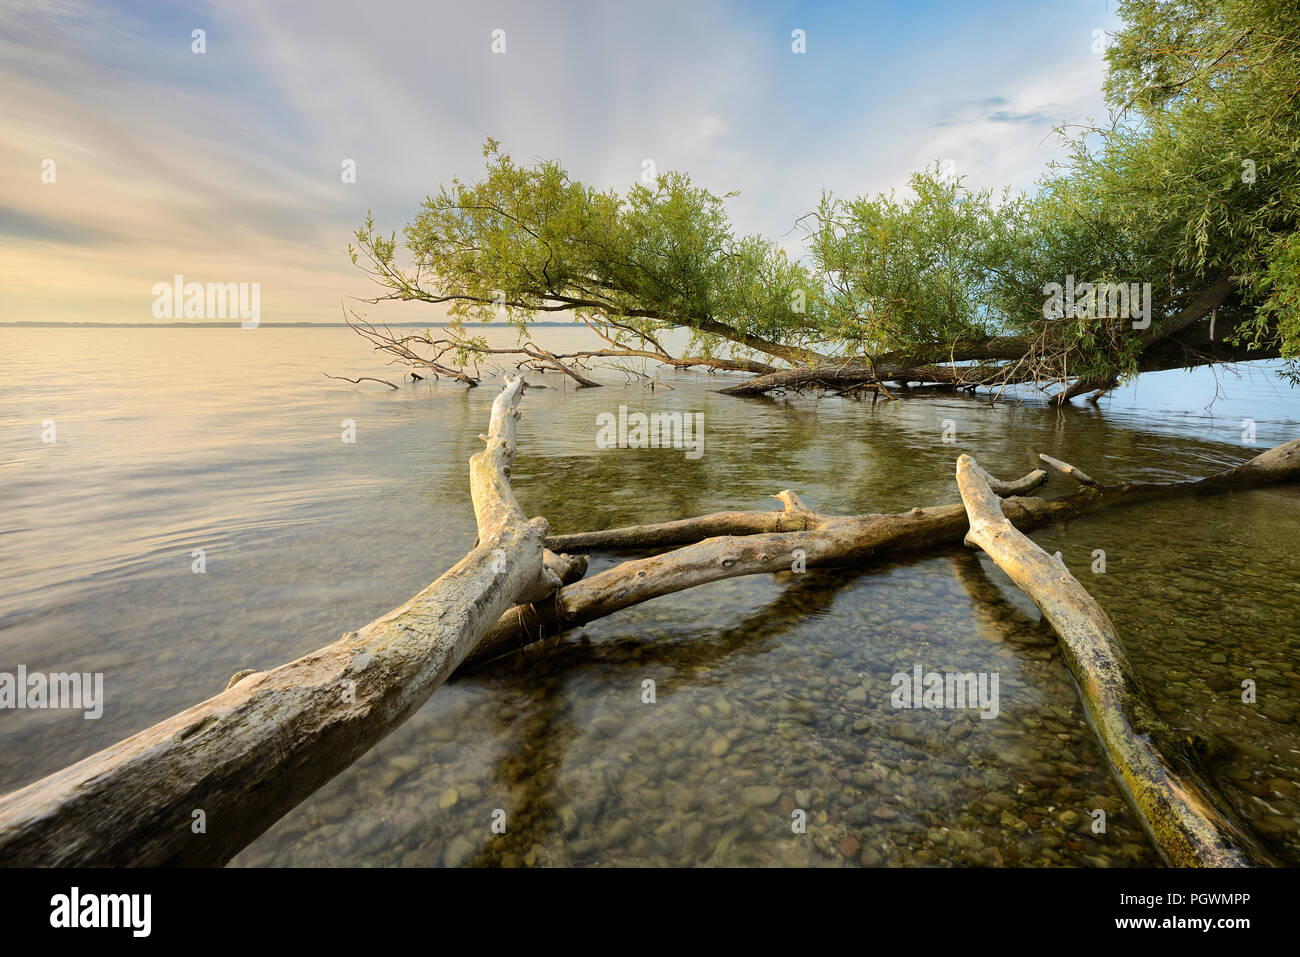 Untouched nature on the banks of the Müritz, tree trunks lying in the water, morning light, near Röbel Stock Photo